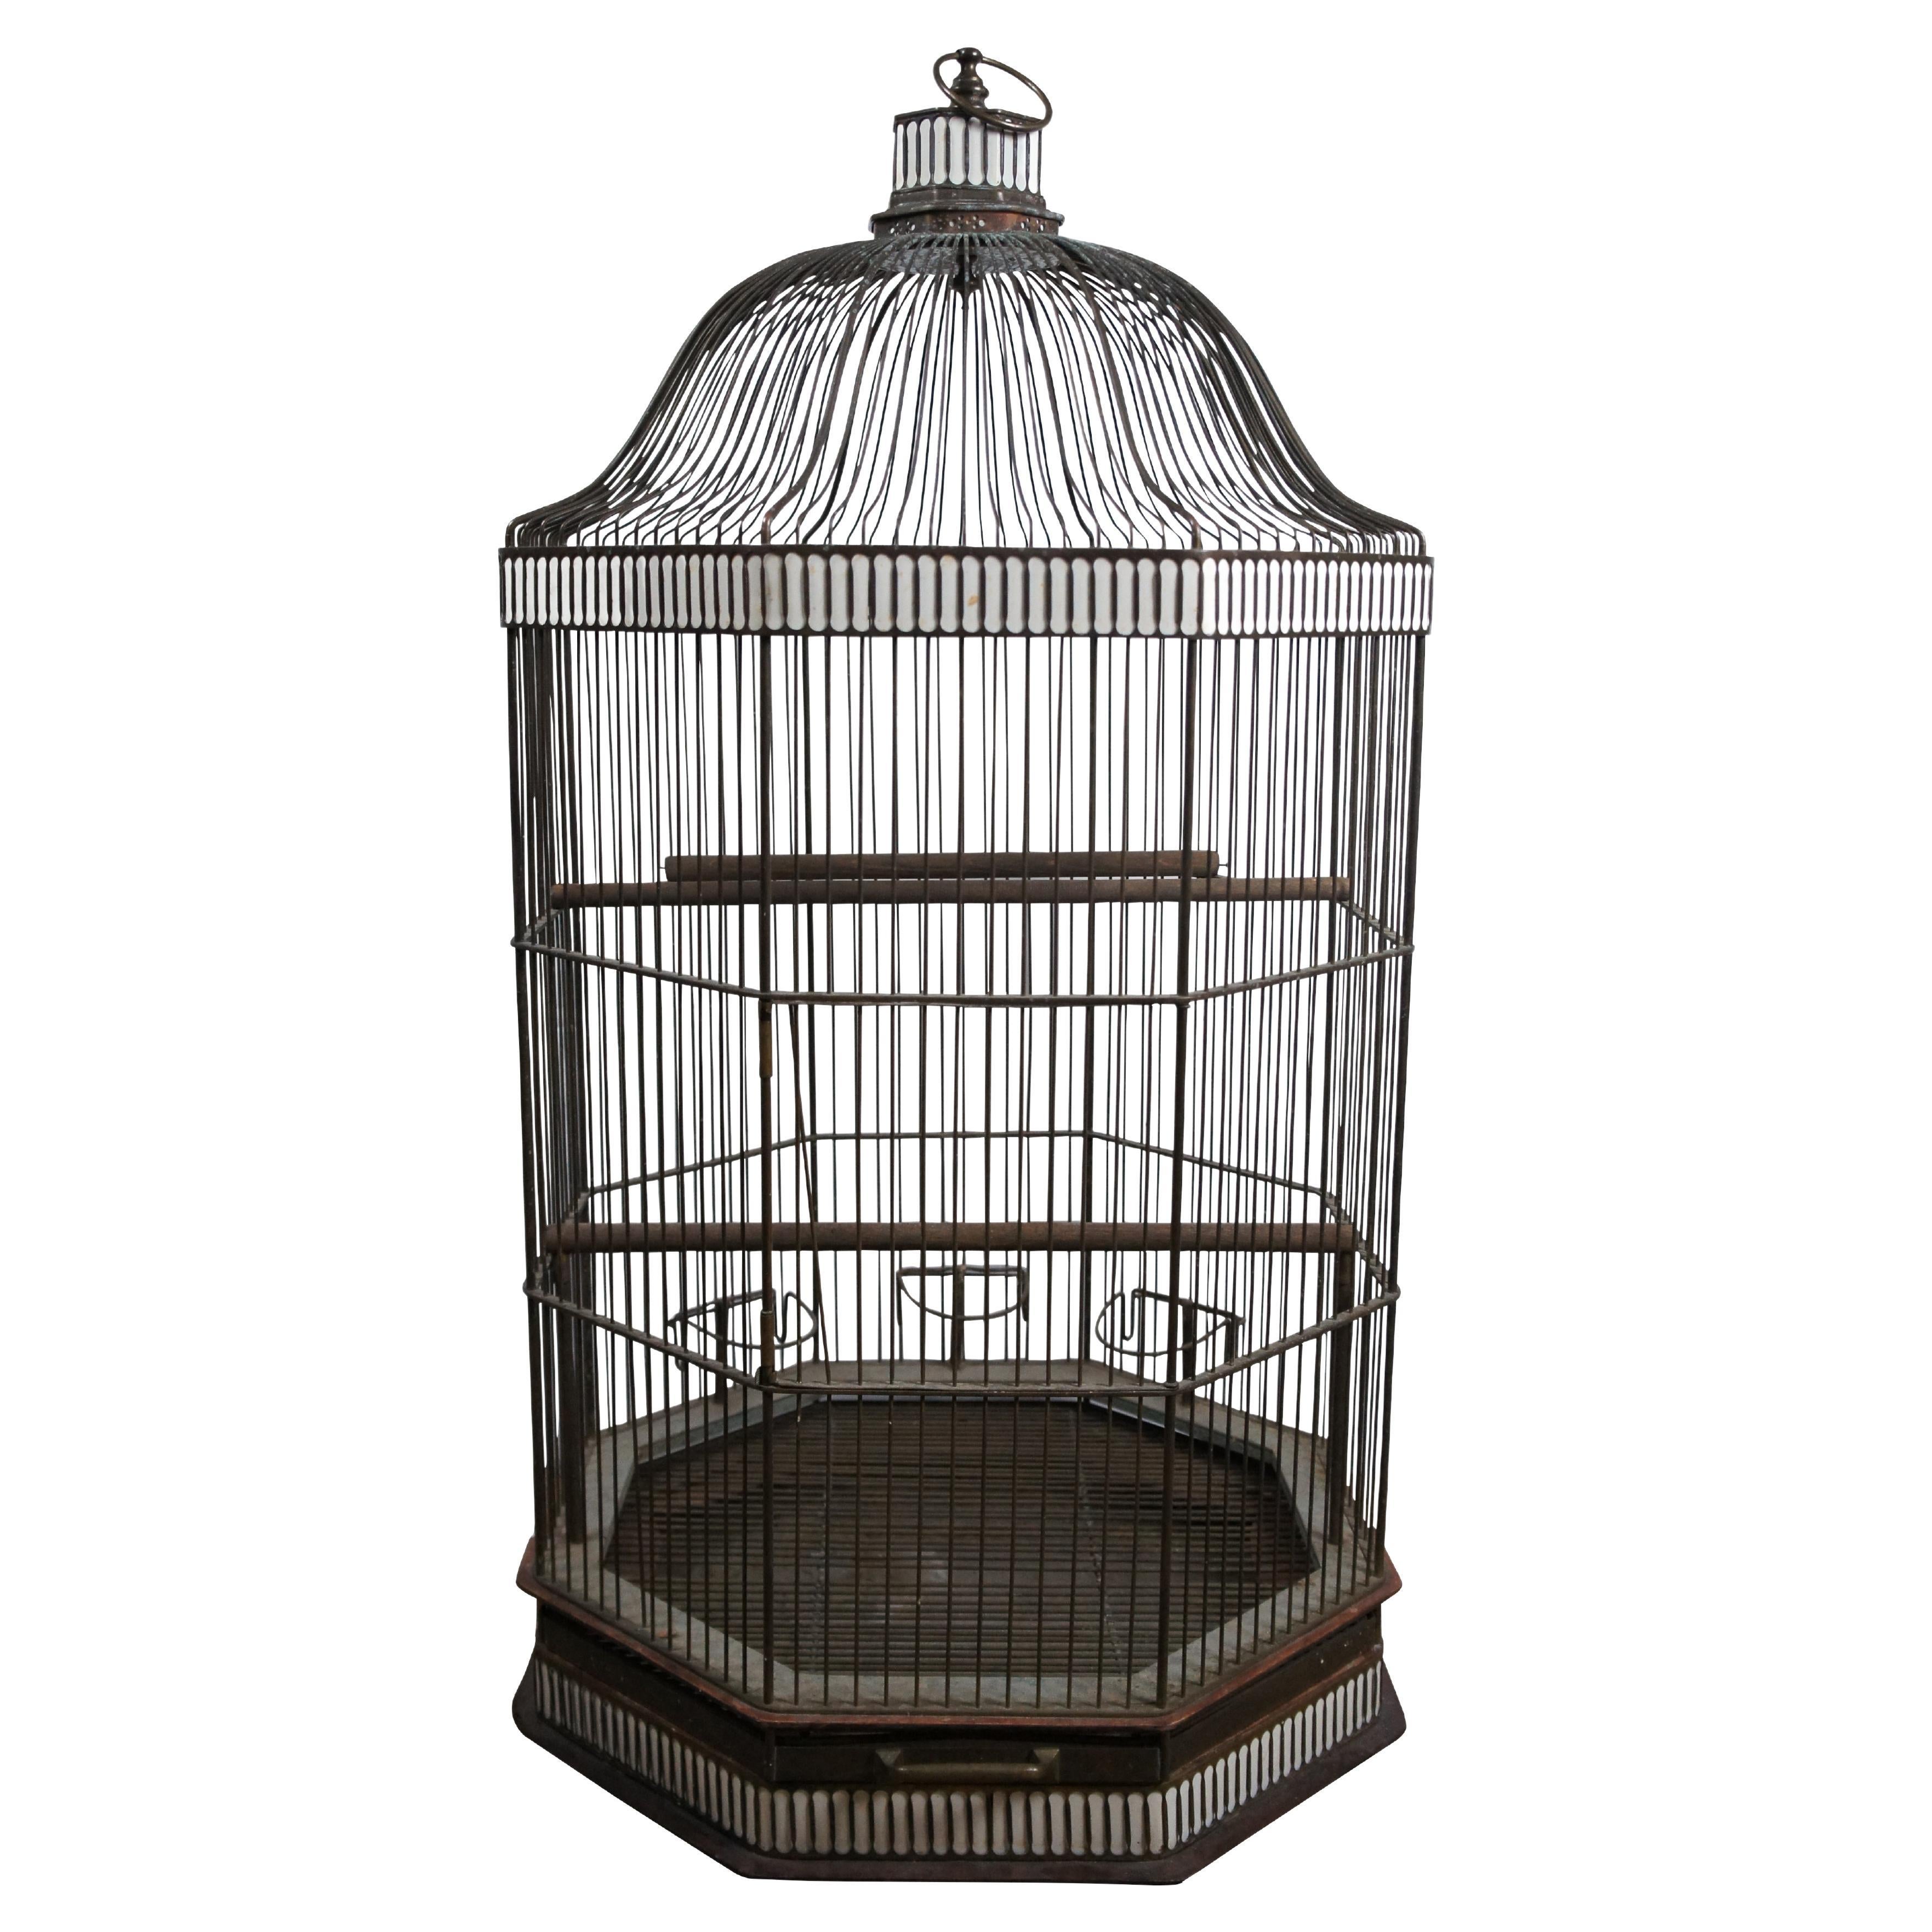 Rare Monumental Antique Victorian Brass Octagonal Hanging Dome Top Bird Cage 40" For Sale